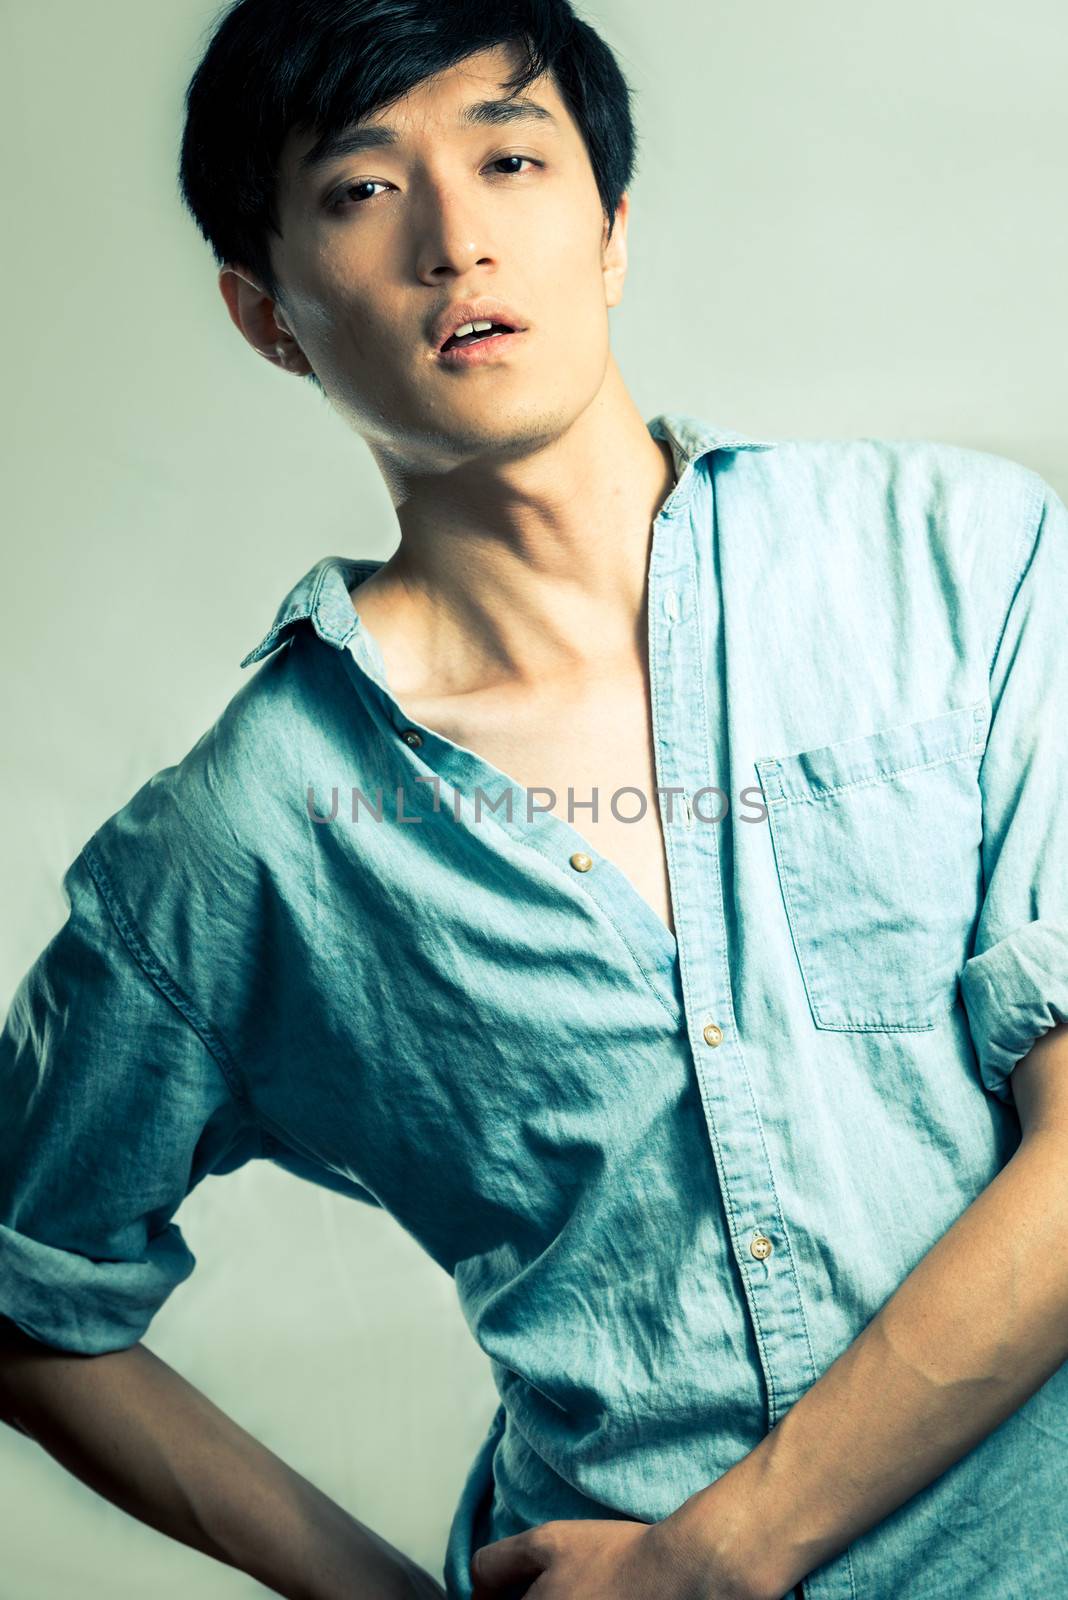 Studio fashion pose by a handsome young male model, with fashion tone and background